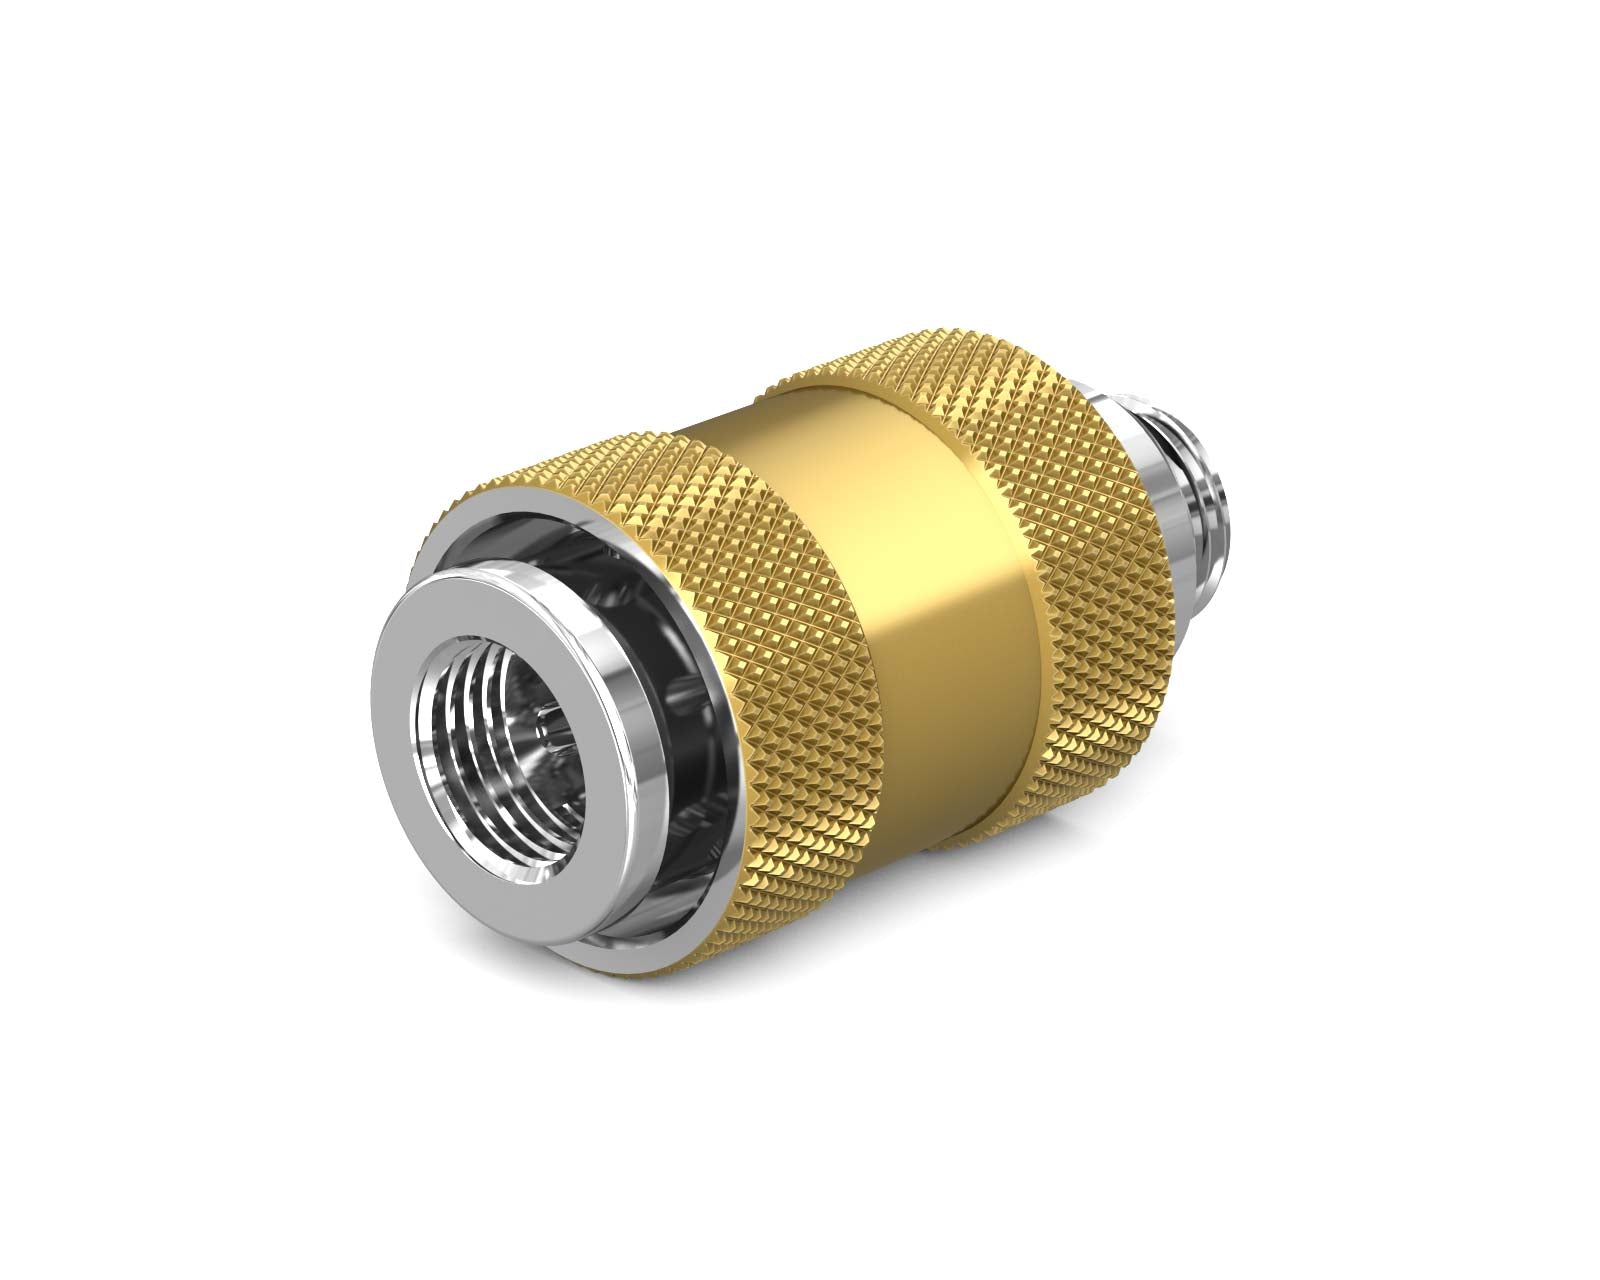 BSTOCK:PrimoChill Male to Female G 1/4 SX Pull Drain Valve - Candy Gold - PrimoChill - KEEPING IT COOL